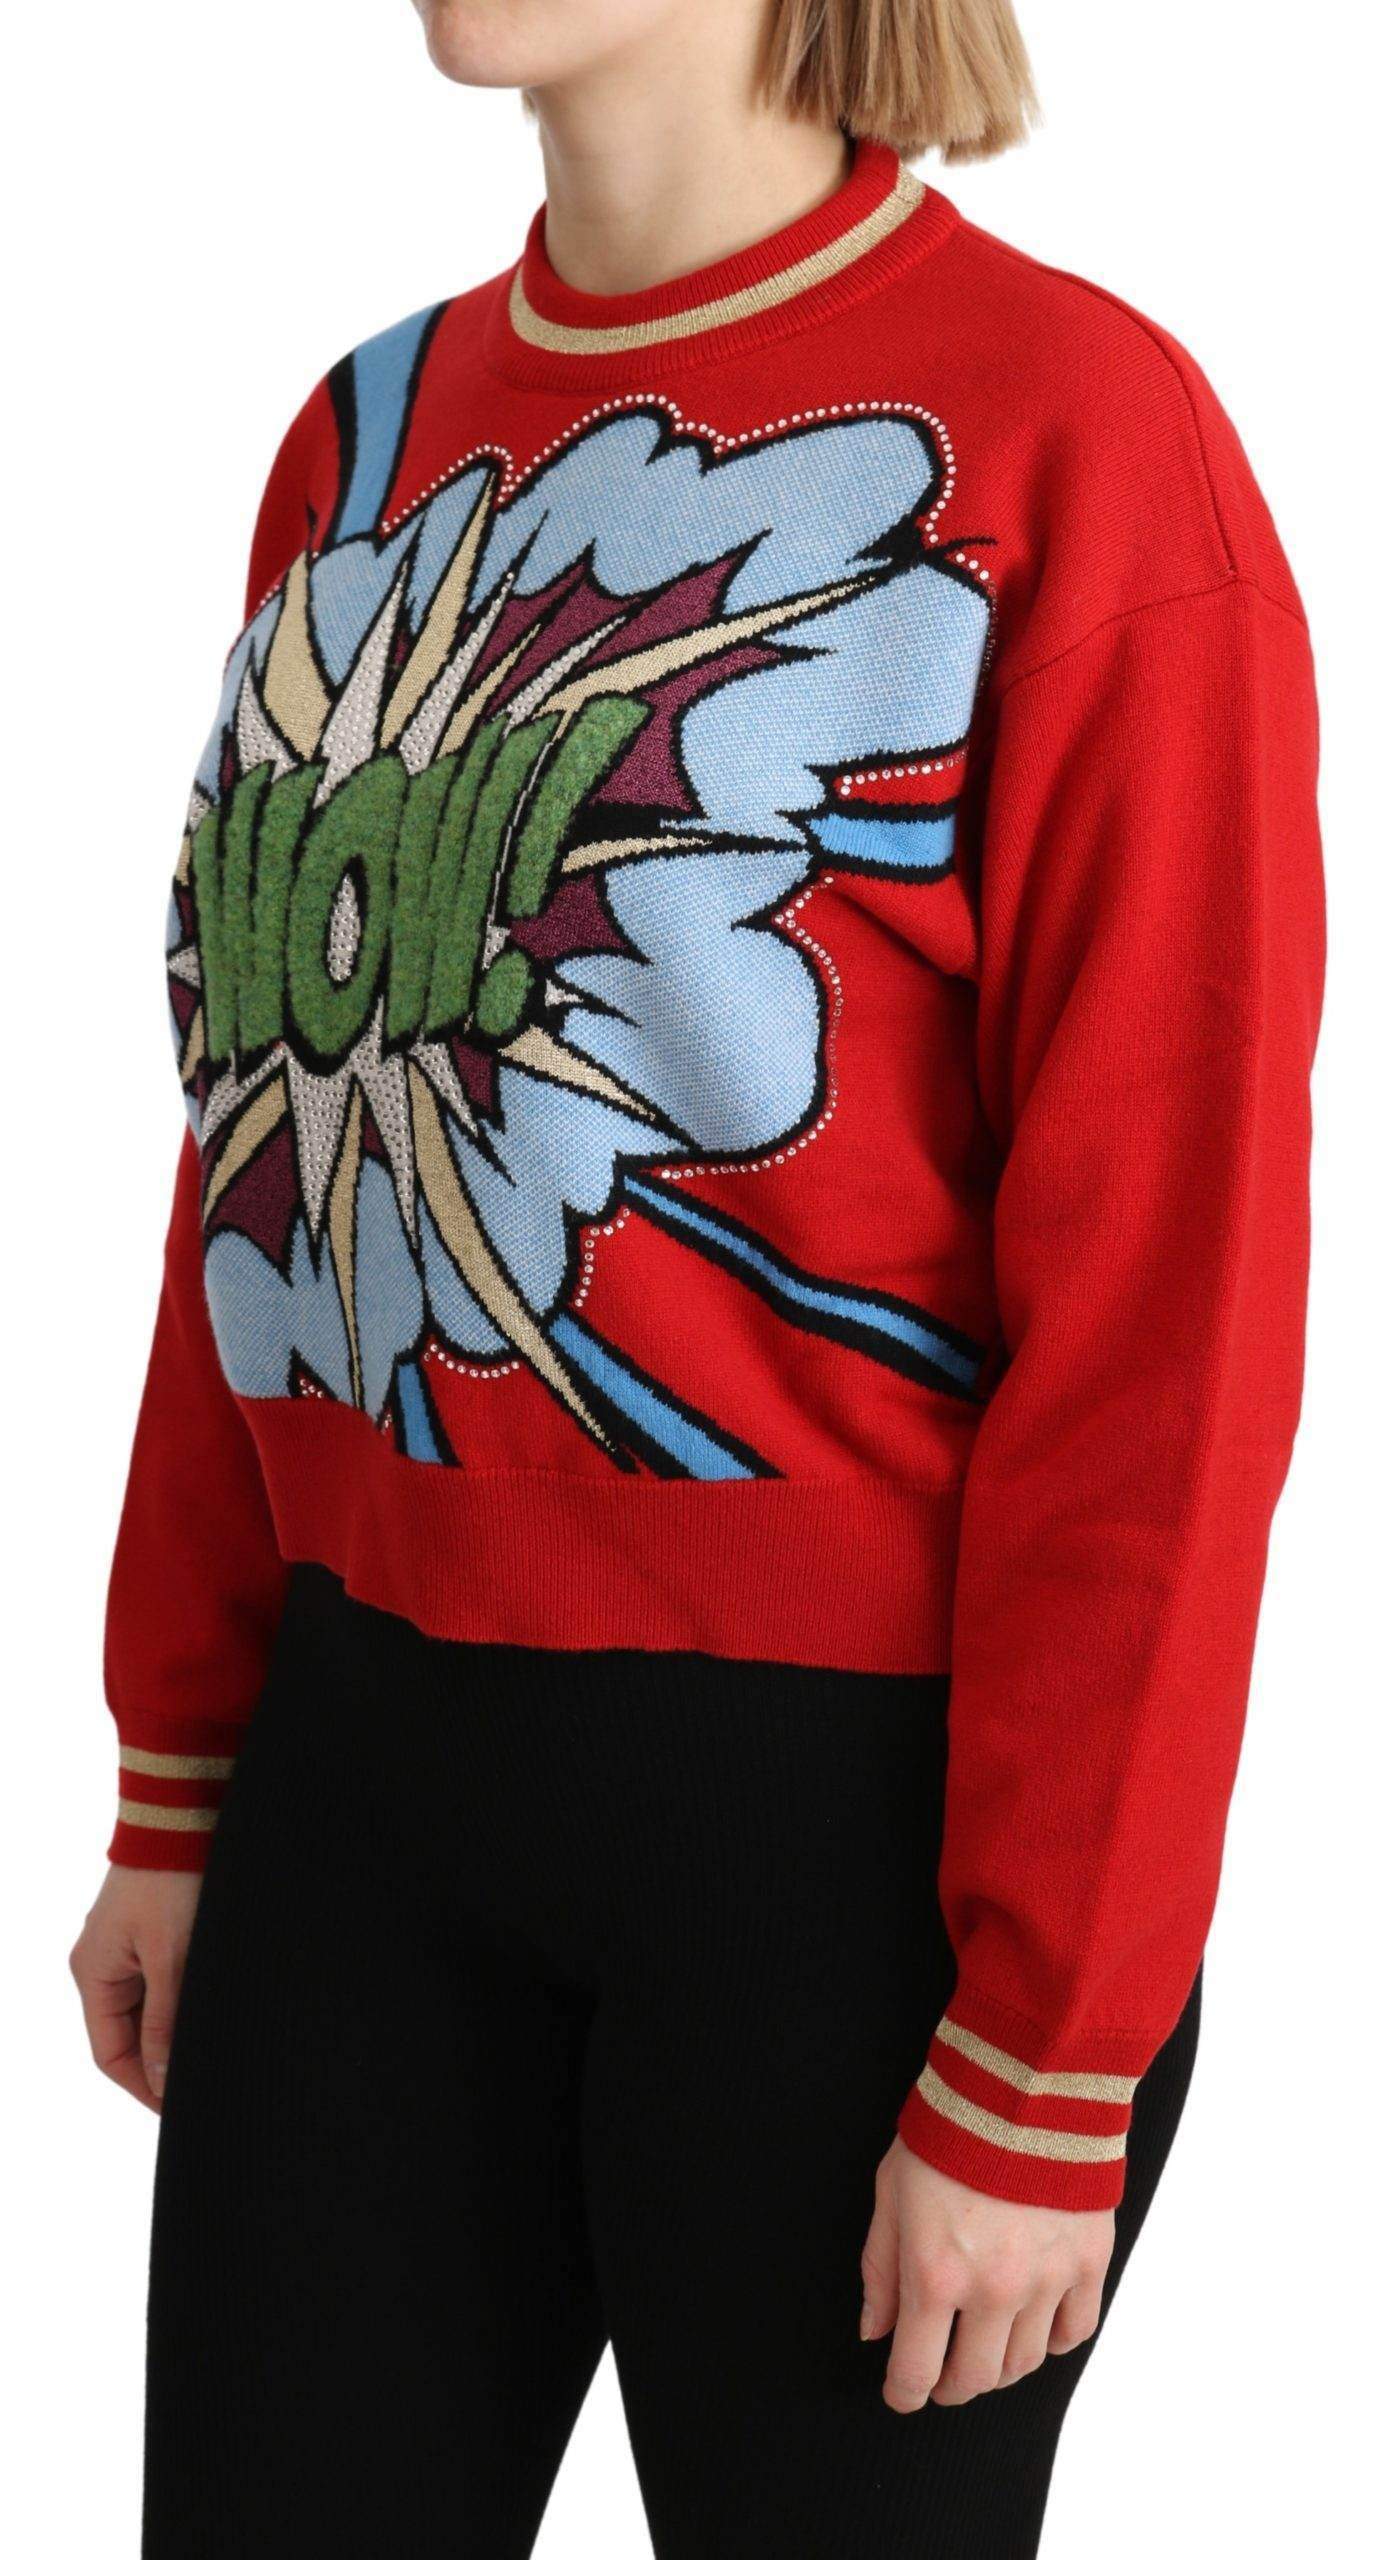 Dolce & Gabbana Red Knitted Cashmere Cartoon Top Sweater #women, Brand_Dolce & Gabbana, Catch, Dolce & Gabbana, feed-agegroup-adult, feed-color-red, feed-gender-female, feed-size-IT38|XS, feed-size-IT40|S, feed-size-IT42|M, Gender_Women, IT38|XS, IT40|S, IT42|M, IT44|L, Kogan, Red, Sweaters - Women - Clothing, Women - New Arrivals at SEYMAYKA